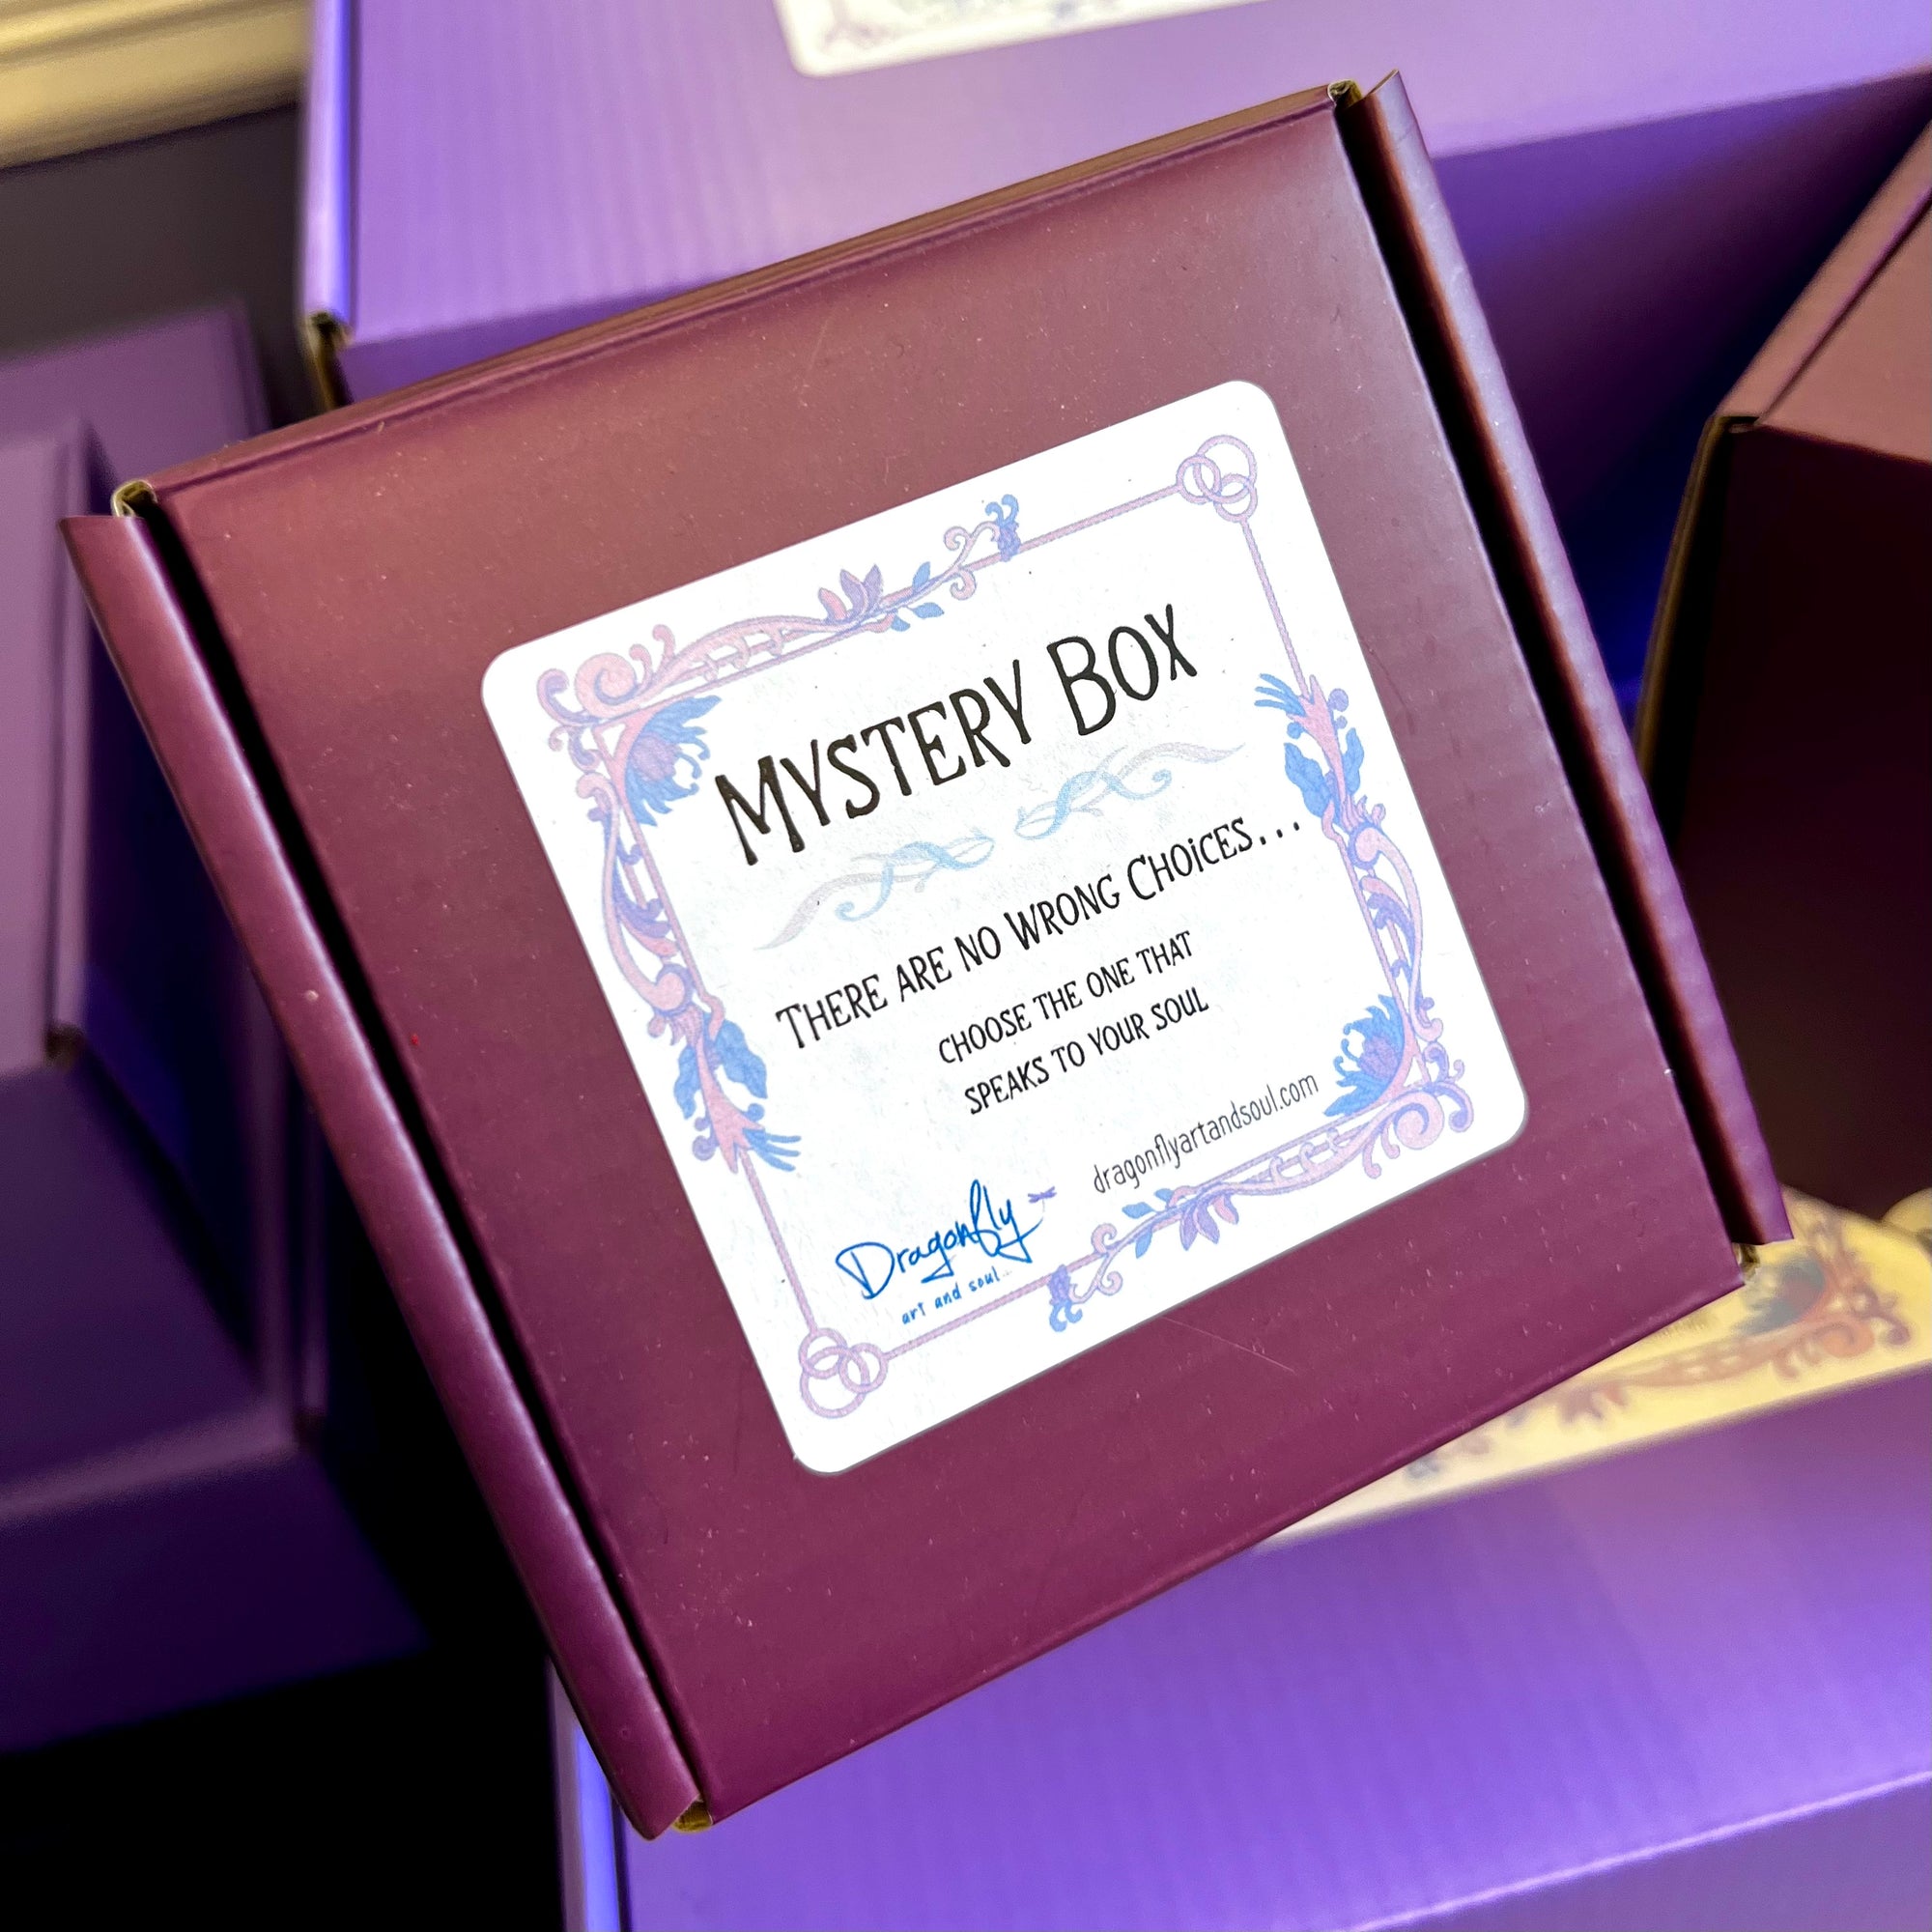 A purple Mystery Box labeled with a decorative design around the text. The label reads: "There are no wrong choices... Choose the one that speaks to your soul." Several other purple Mystery Boxes, each potentially hiding crystals or candles, are visible in the background.